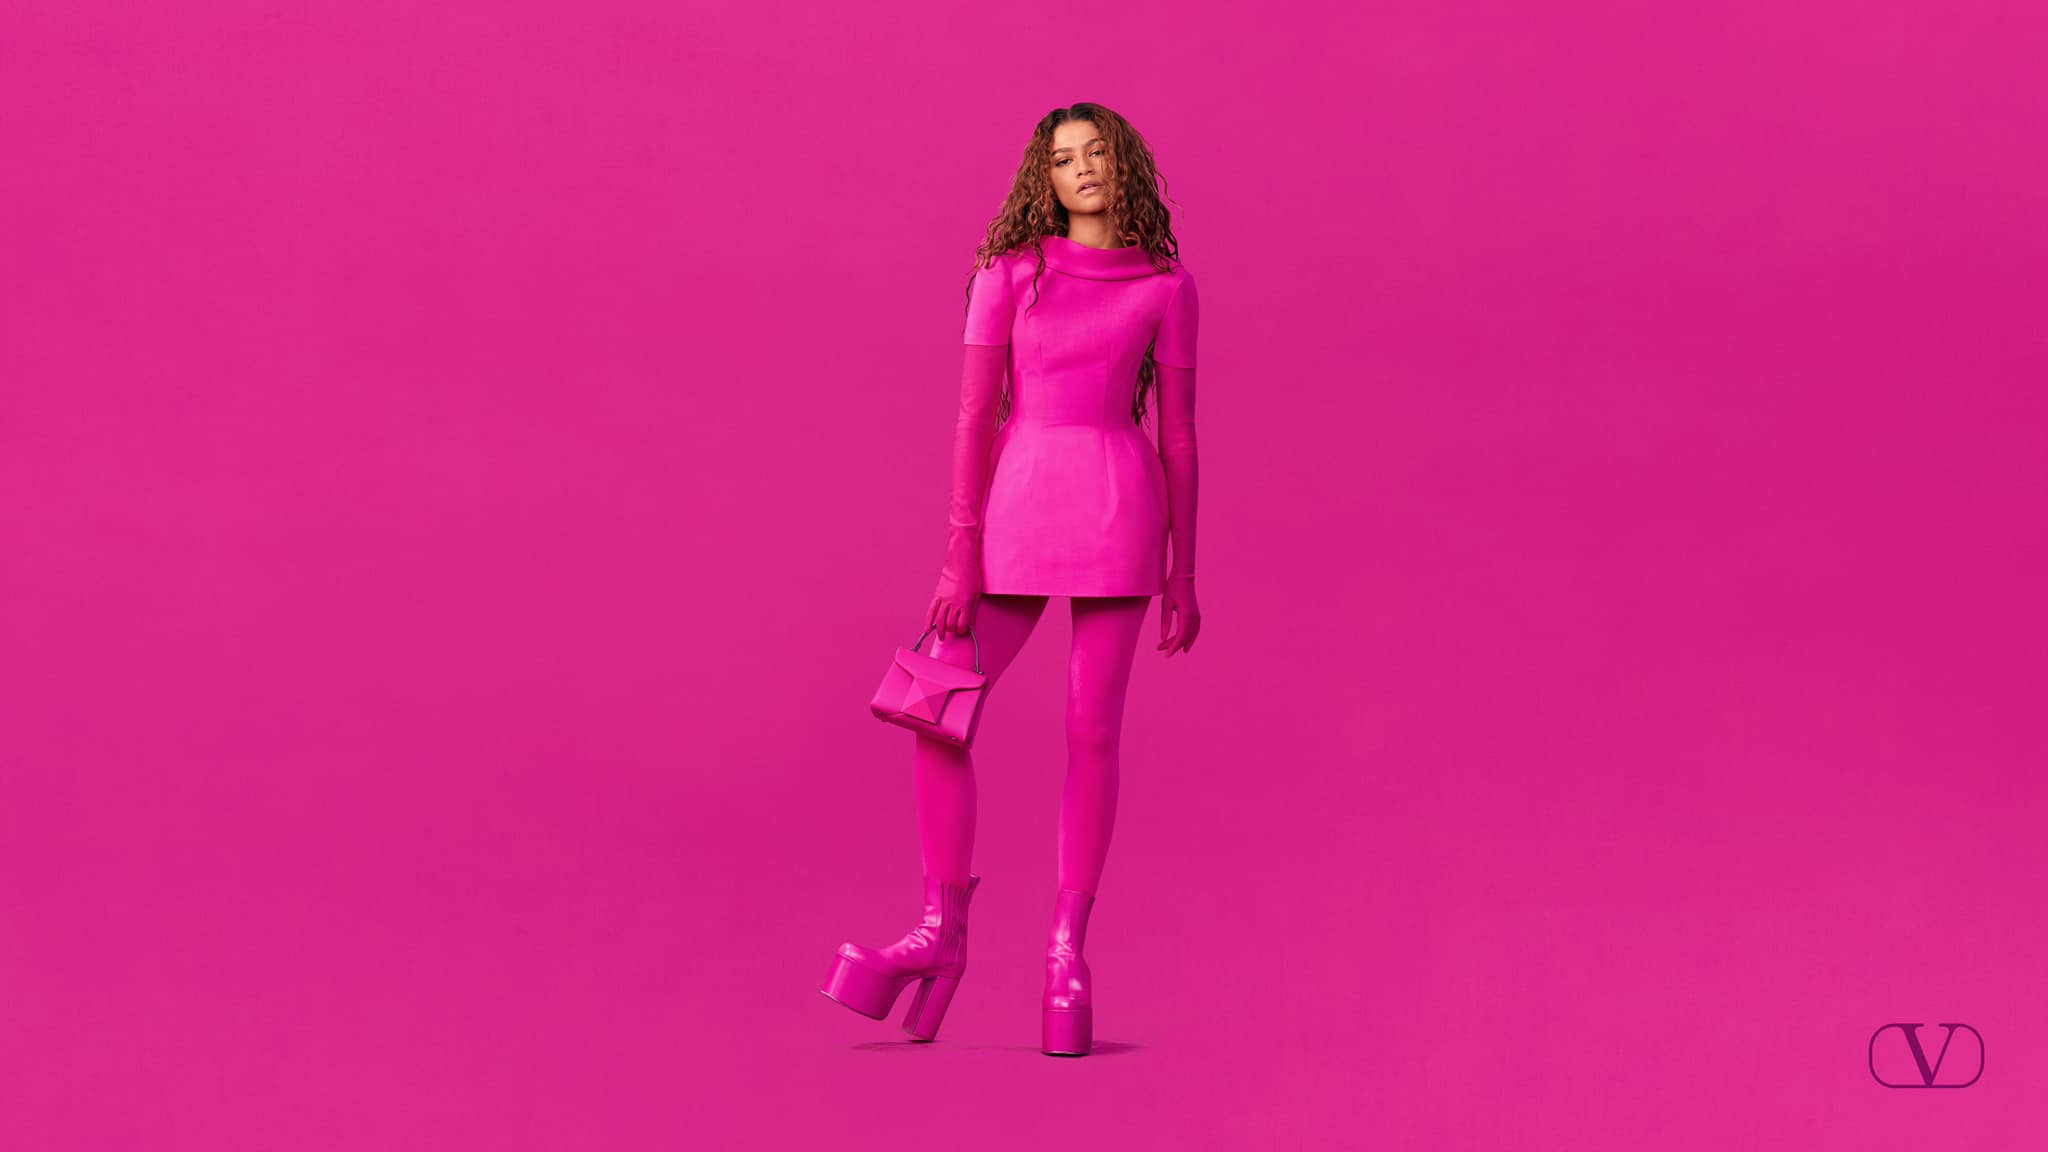 Valentino Unveils Pink PP Campaign Fronted by Zendaya, Lewis Hamilton – WWD